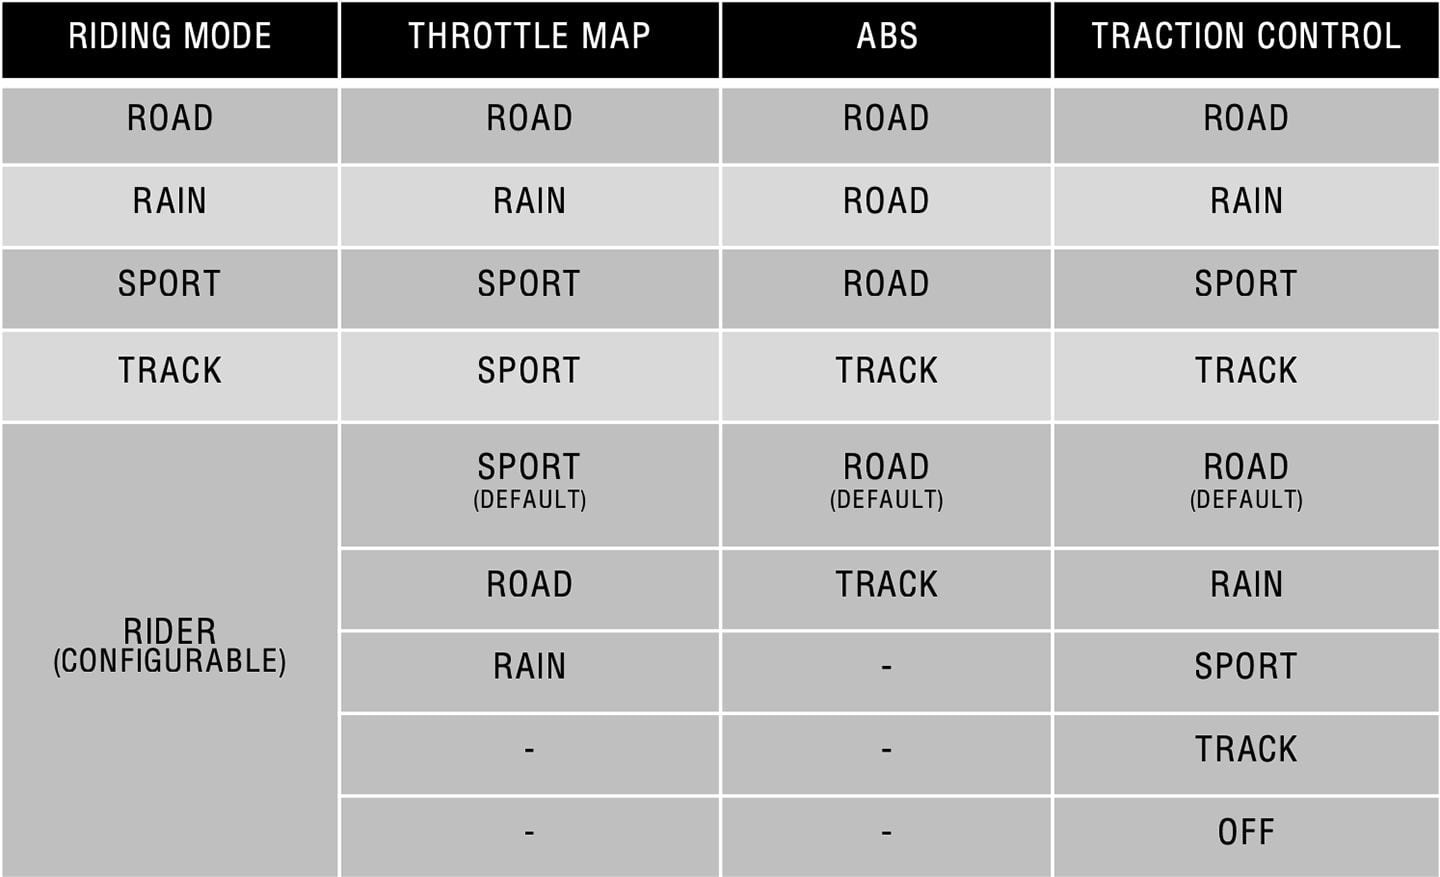 Ride modes for the RS, with default settings. Rain, Road, Sport, and Track settings can be changed within a small window, while Rider can be fully adjusted. Note: R model does not have a Track mode. One frustration is having to come to a stop to move into Track or Rider mode, when TC is turned off.